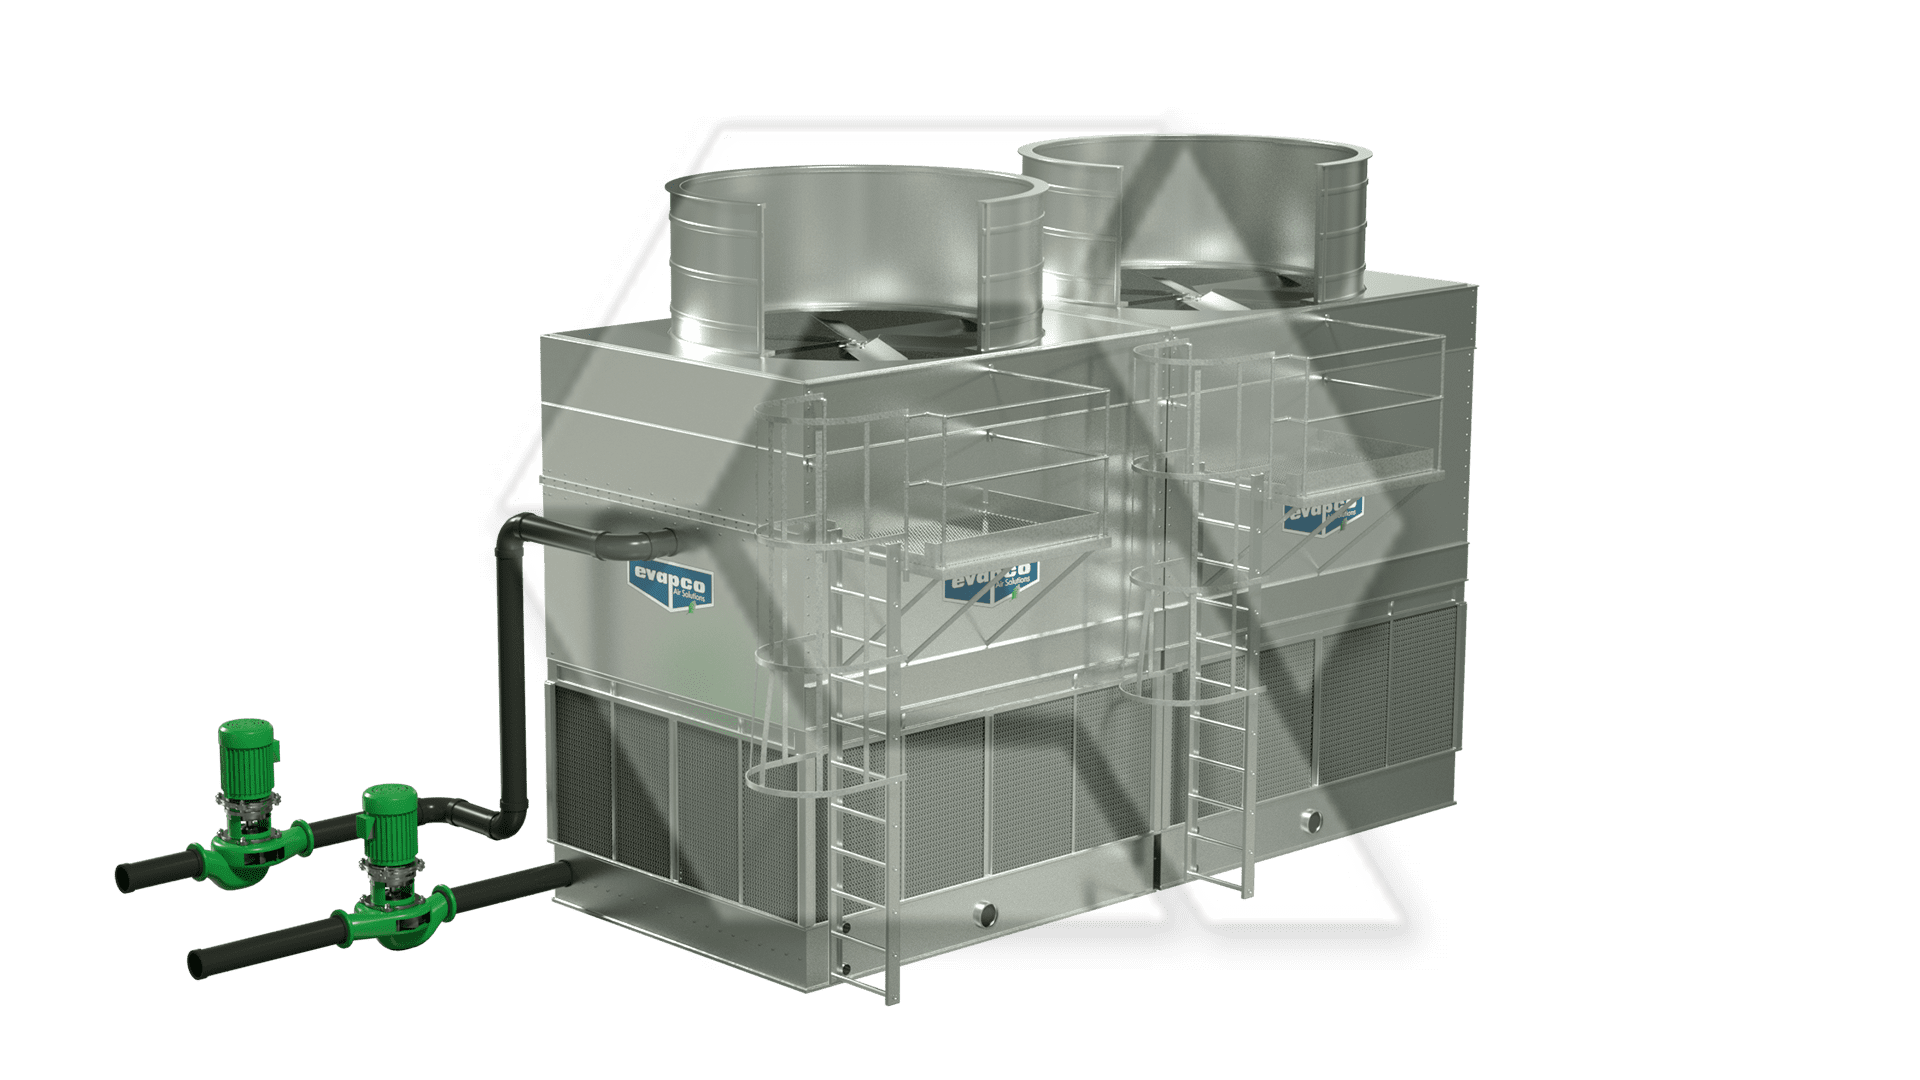 Evapco Cooling Tower